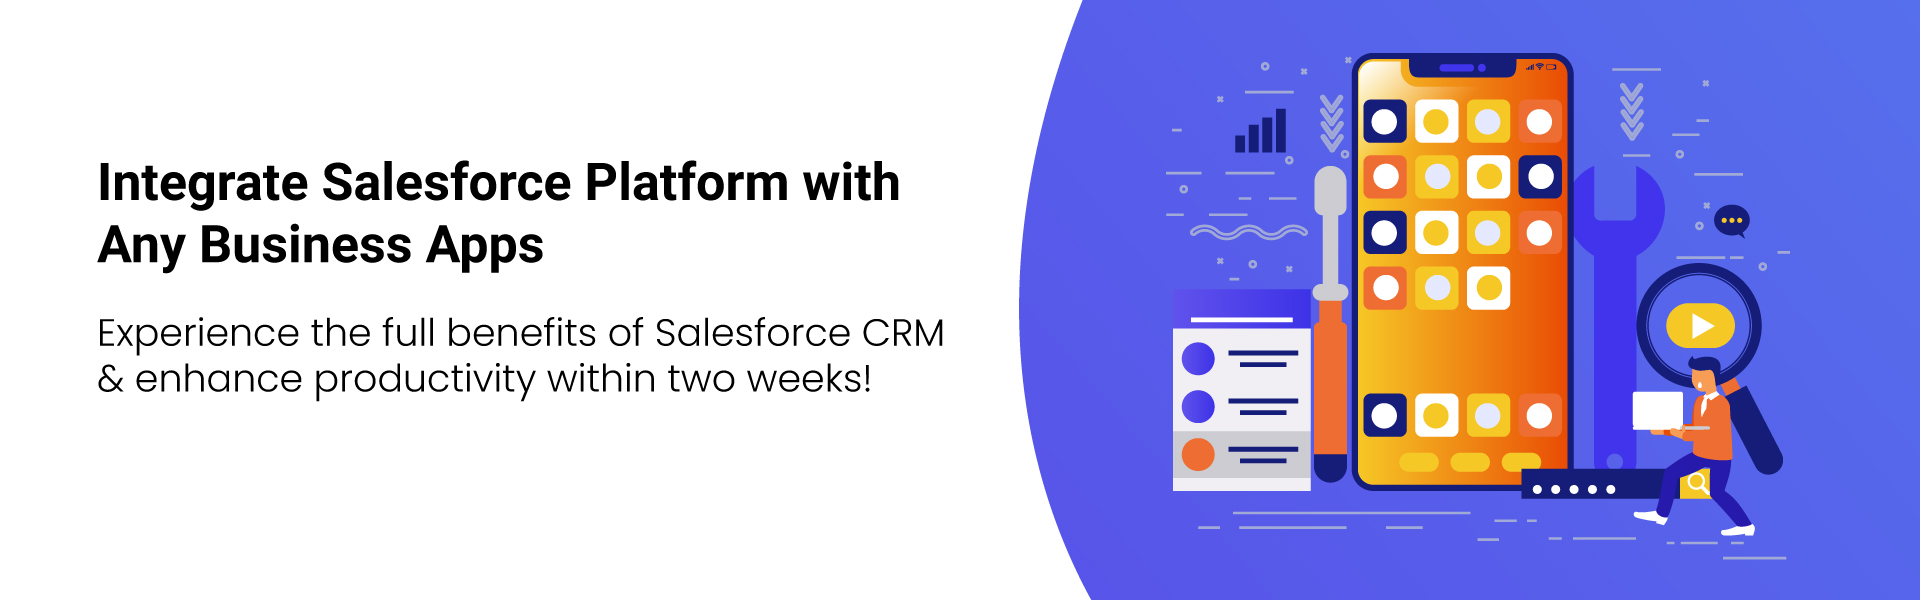 Experience-the-full-benefits-of-Salesforce-CRM-&-enhance-productivity-within-two-weeks!